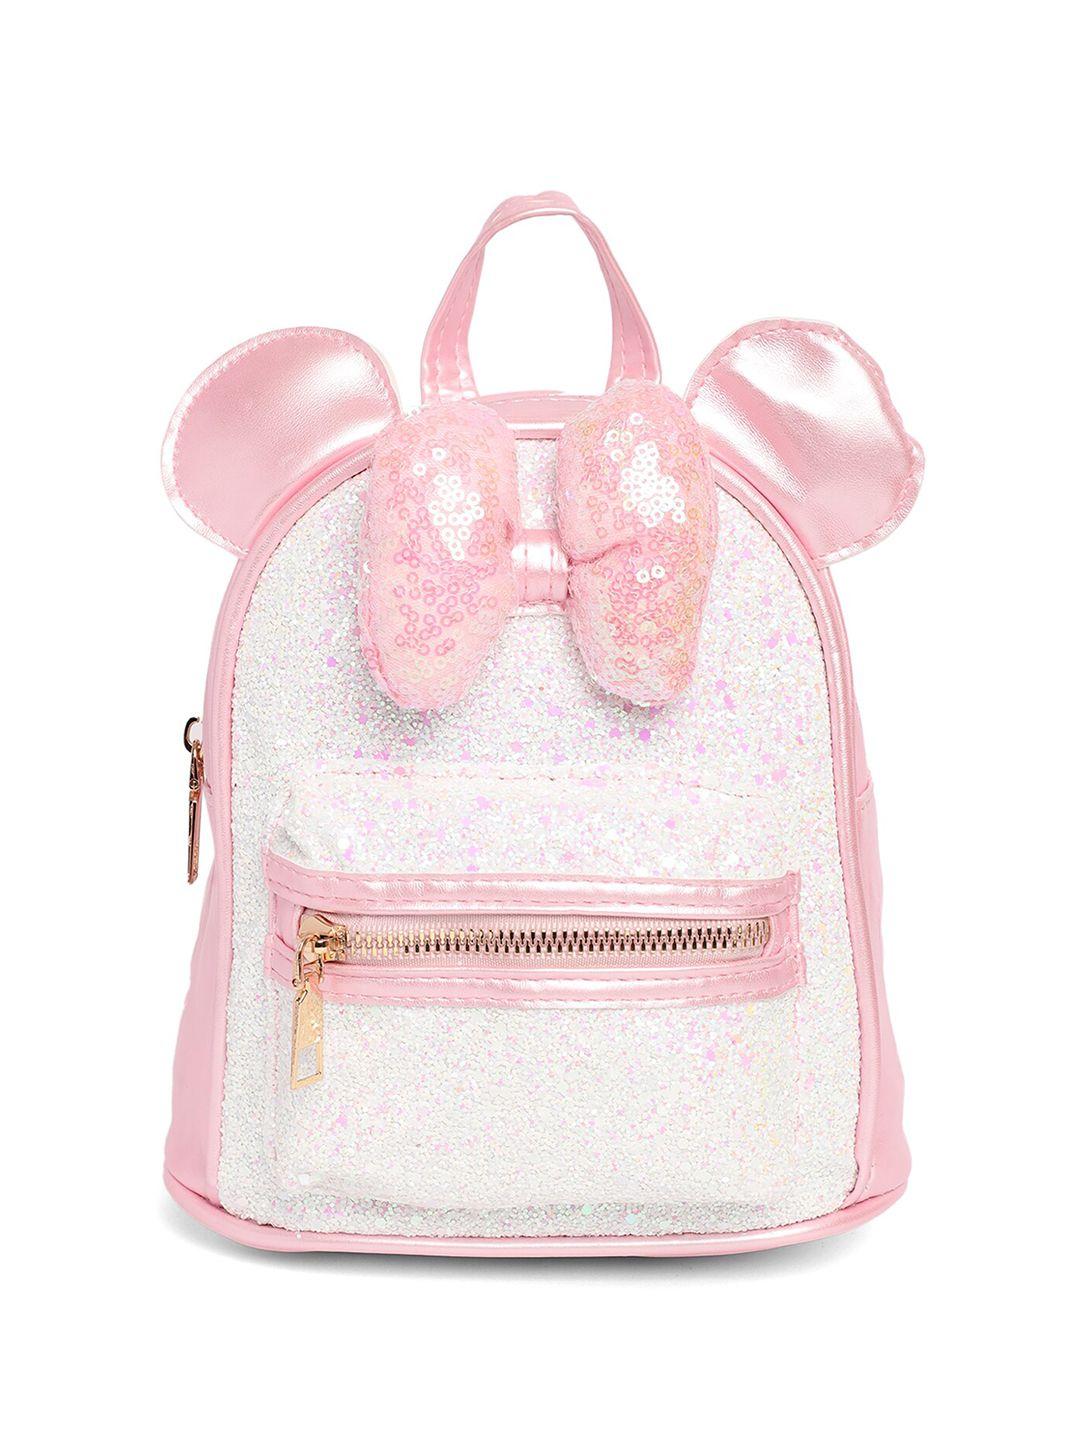 kids on board girls embellished backpack with bow